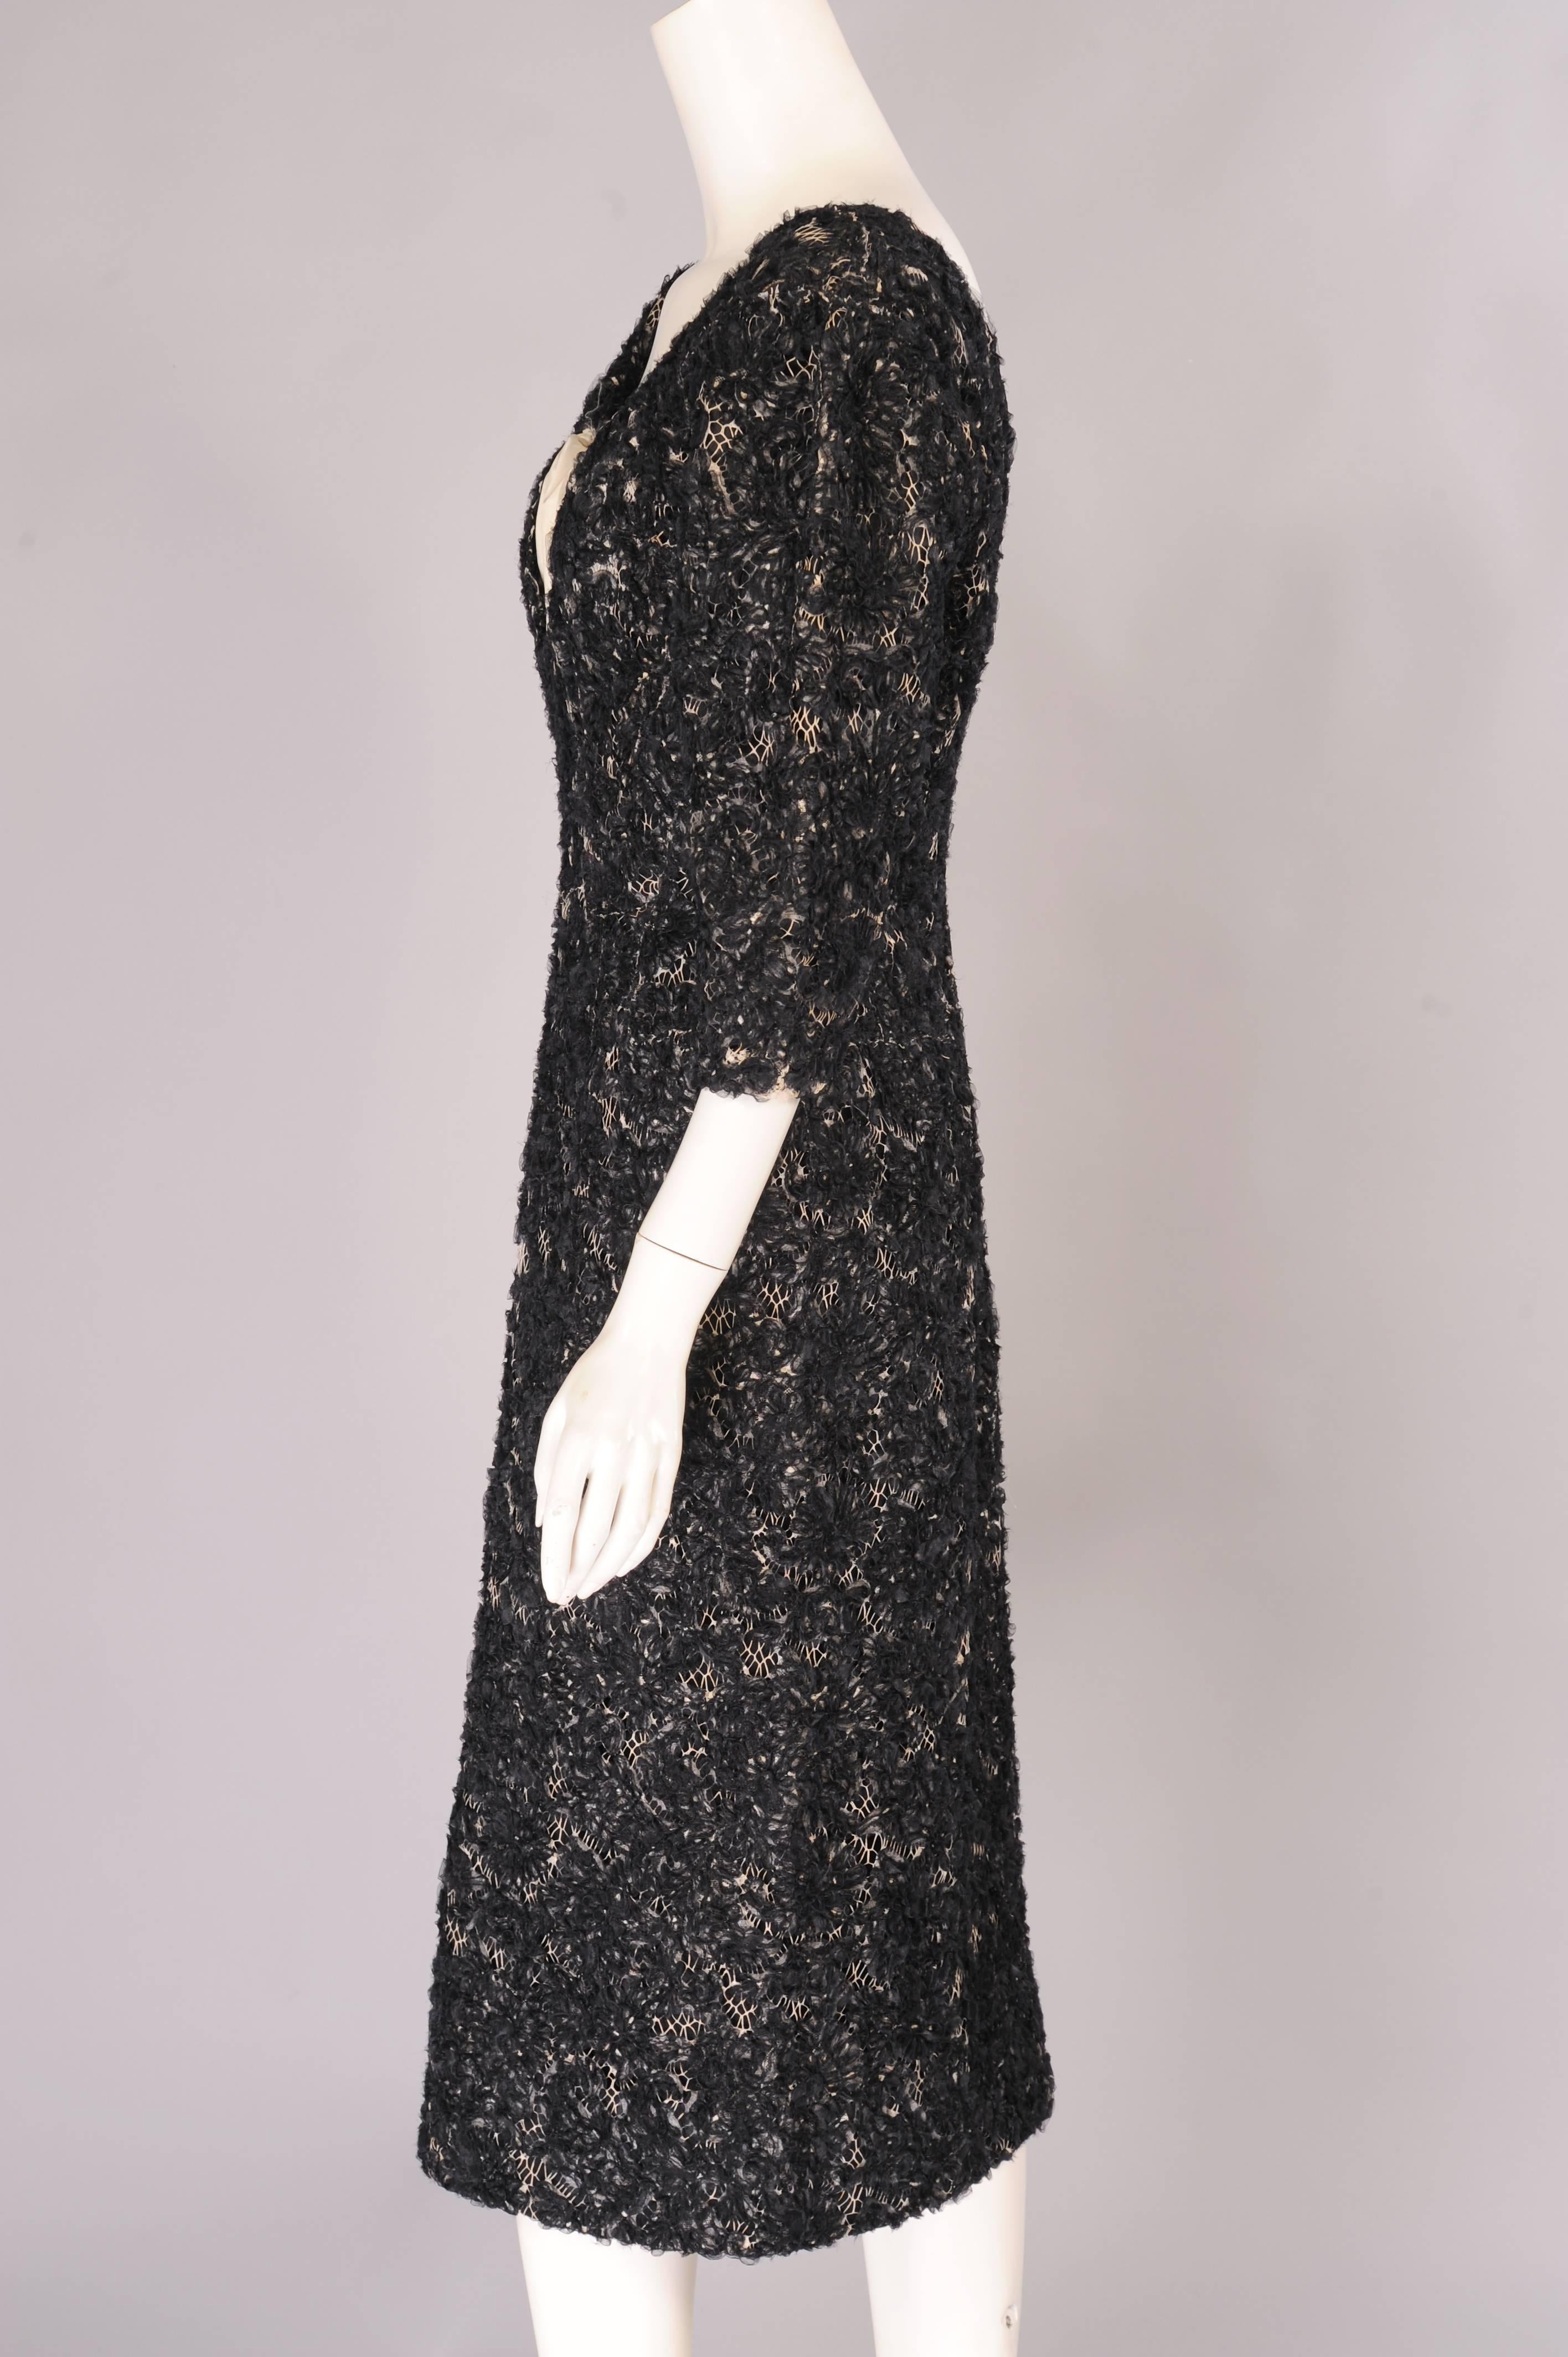 Women's 1950's Dior Couture Cream Lace Dress Embroidered with Black Silk Ribbon